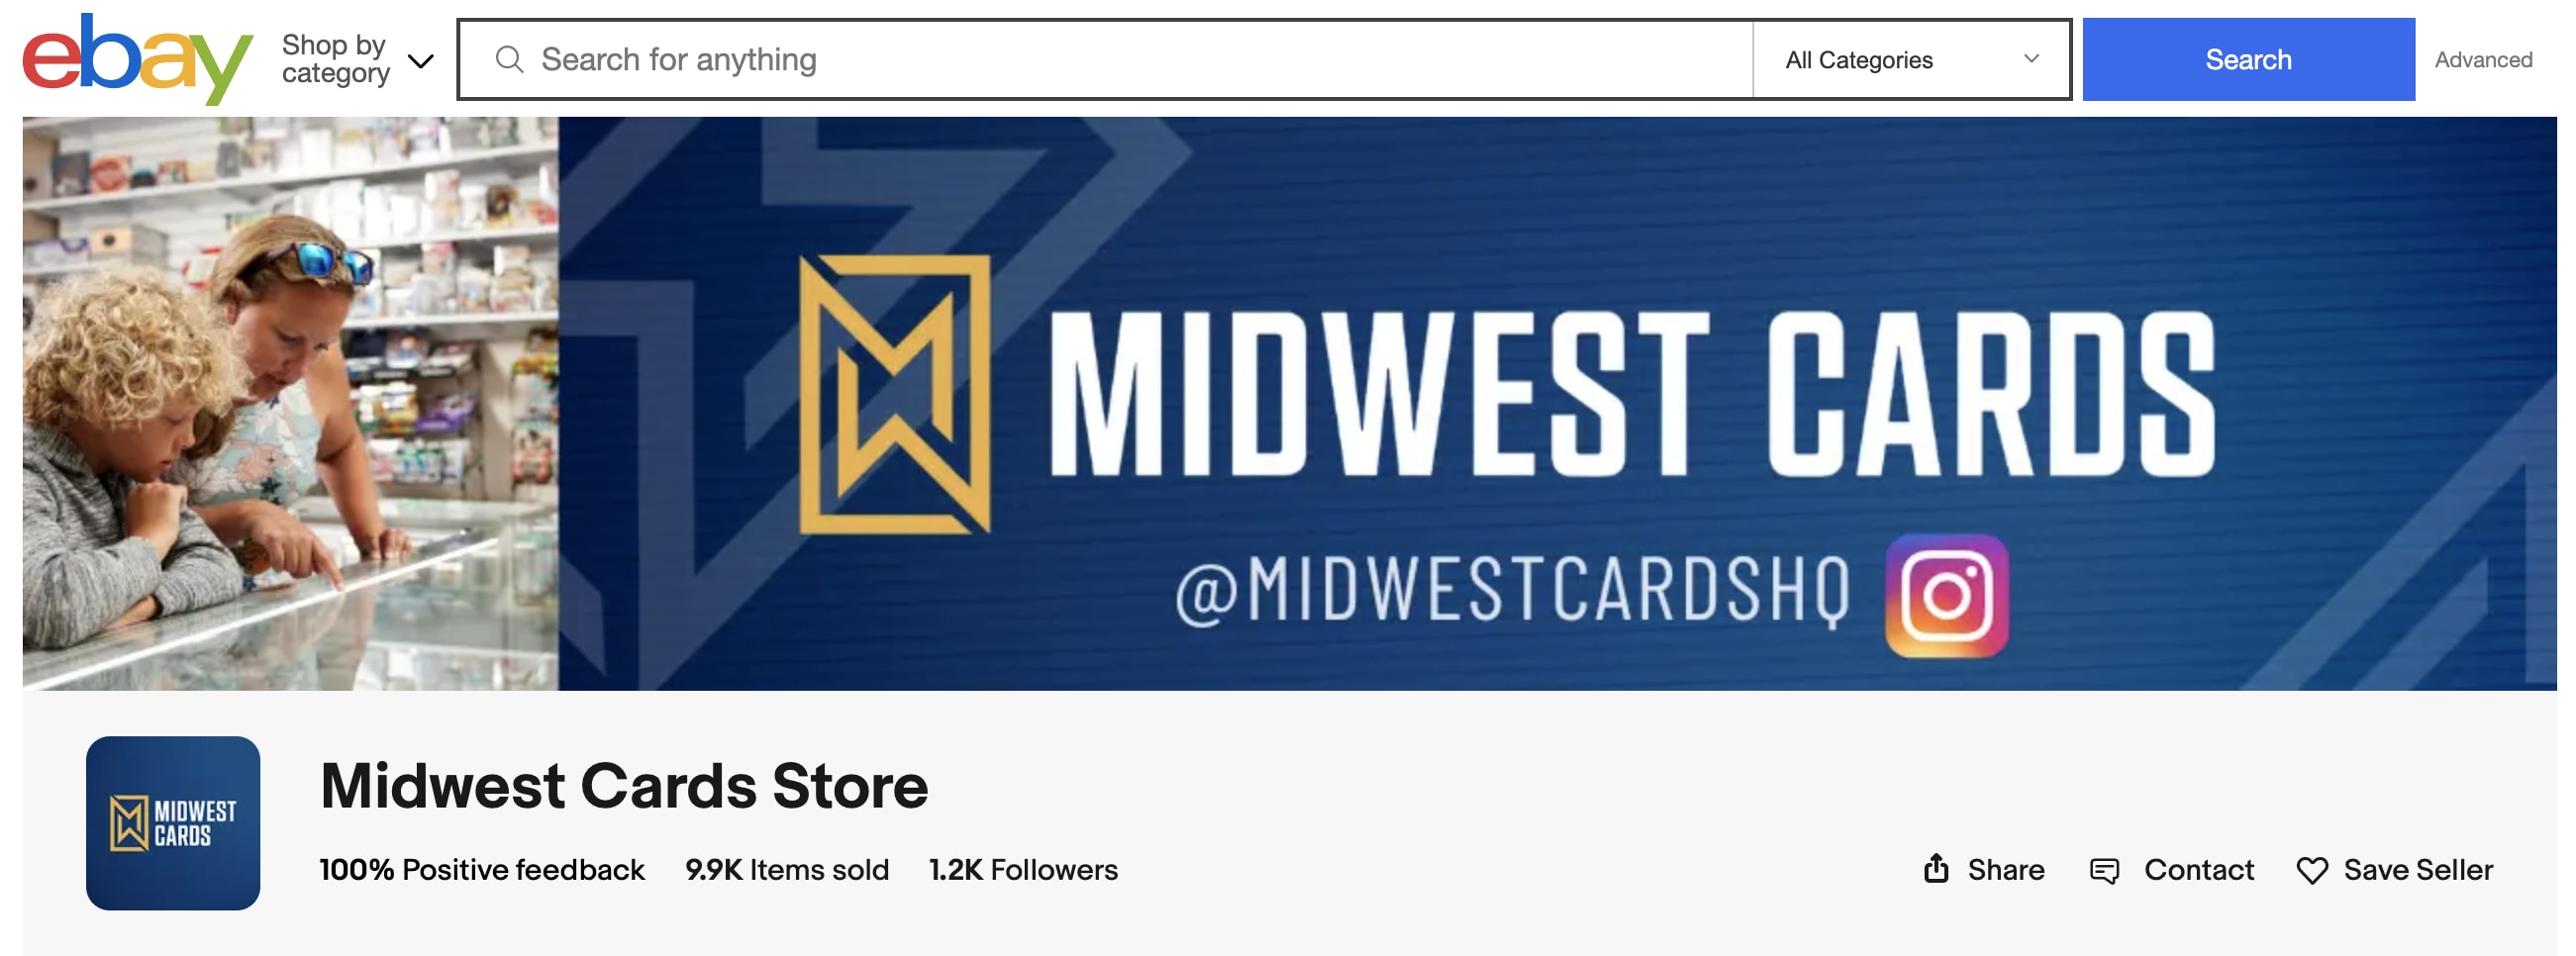 Midwest Cards has sold nearly 10,000 items on its eBay store.